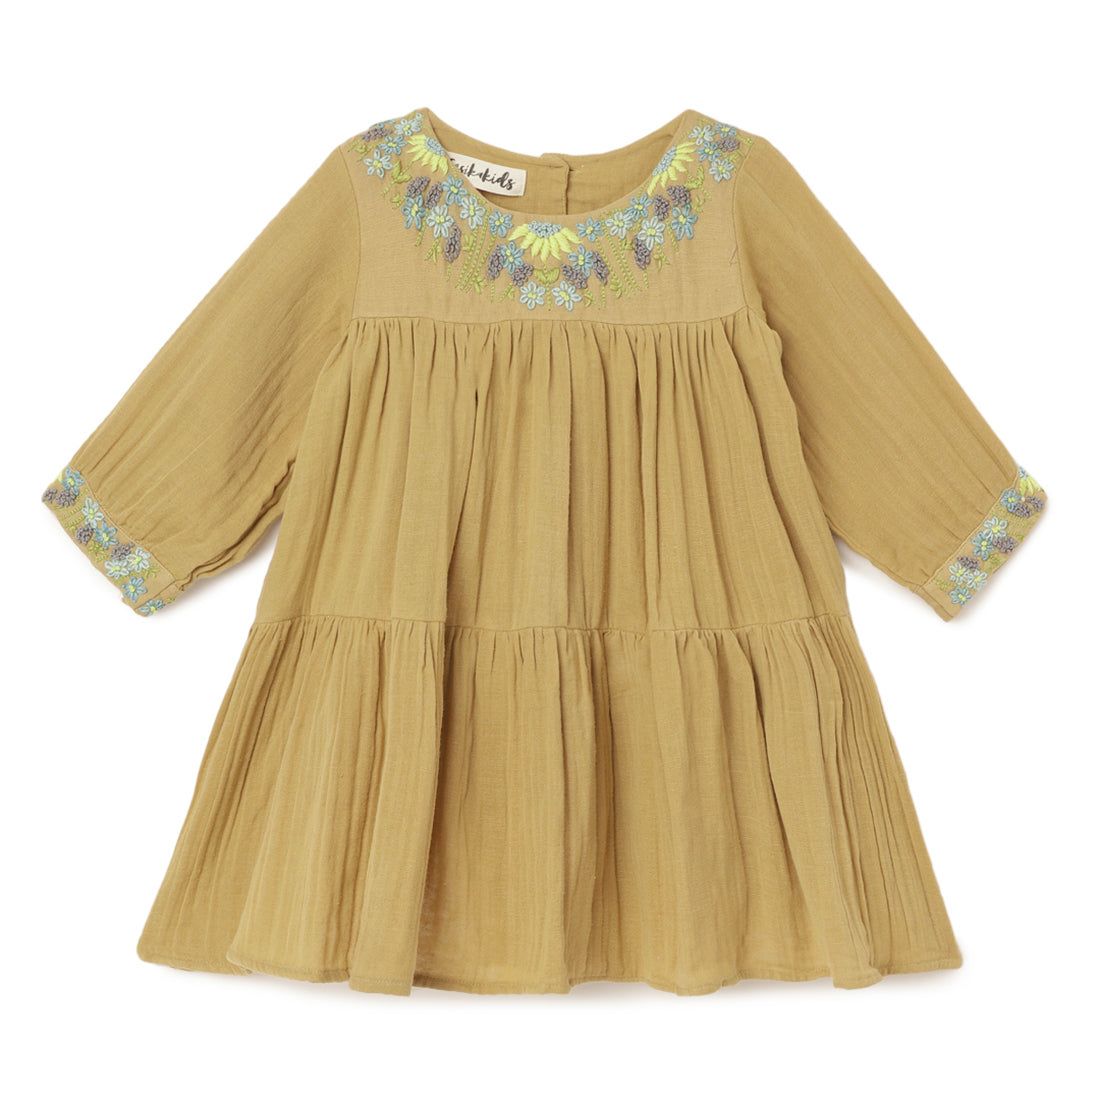 Girls Embroidered Cotton Dress Yellow - 1 yr to 8 yrs - Front